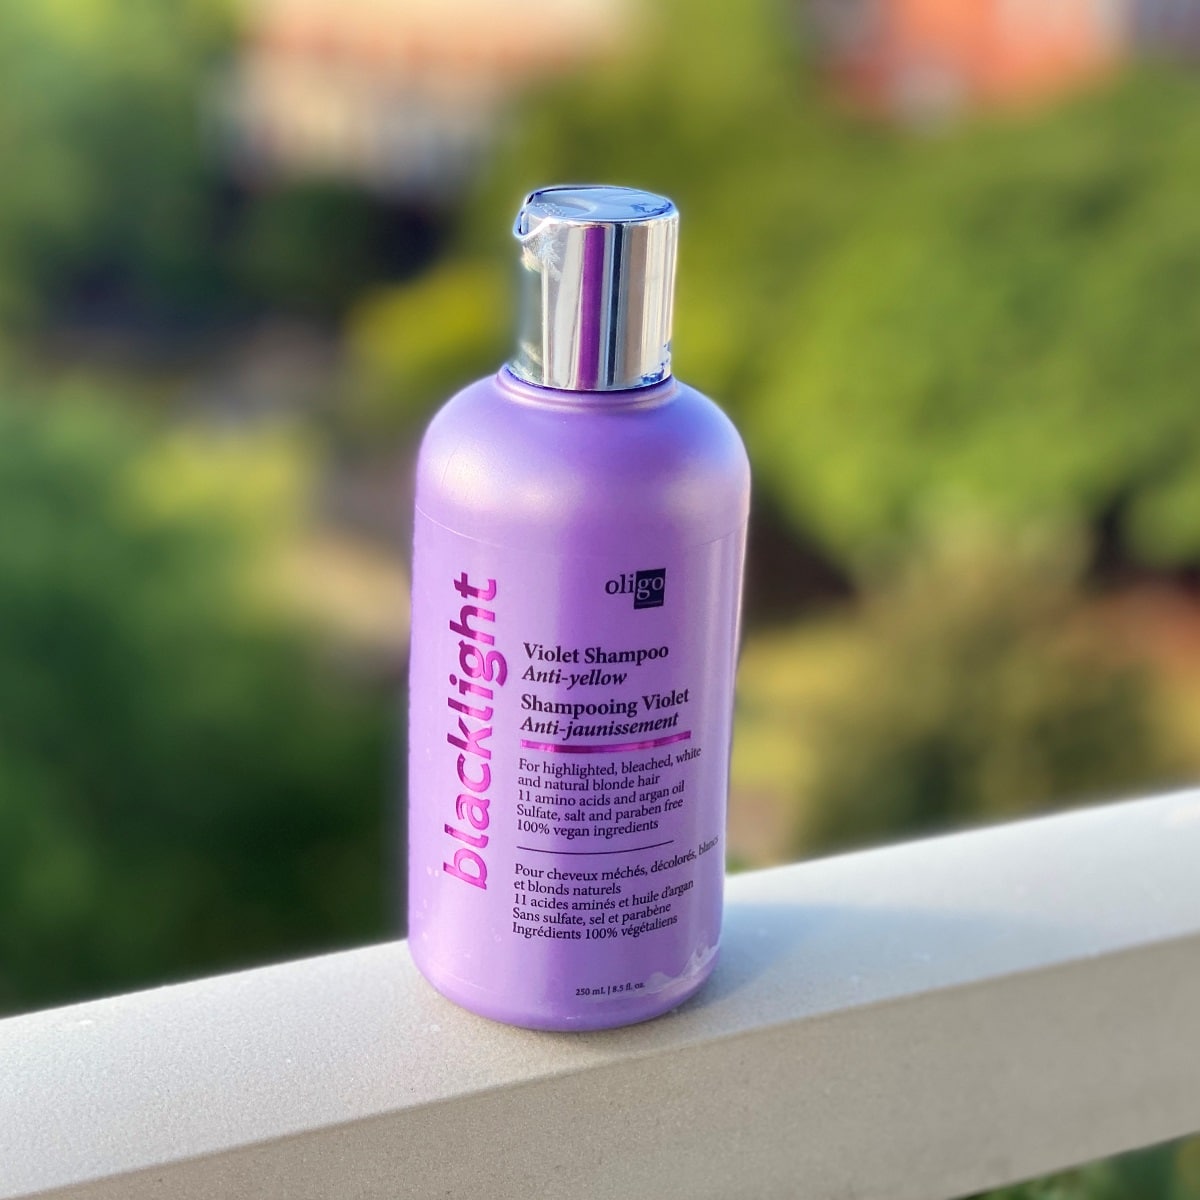 Oligo Professional Blacklight Violet Shampoo is the best purple shampoo for blondes to get rid of yellow and orange undertones